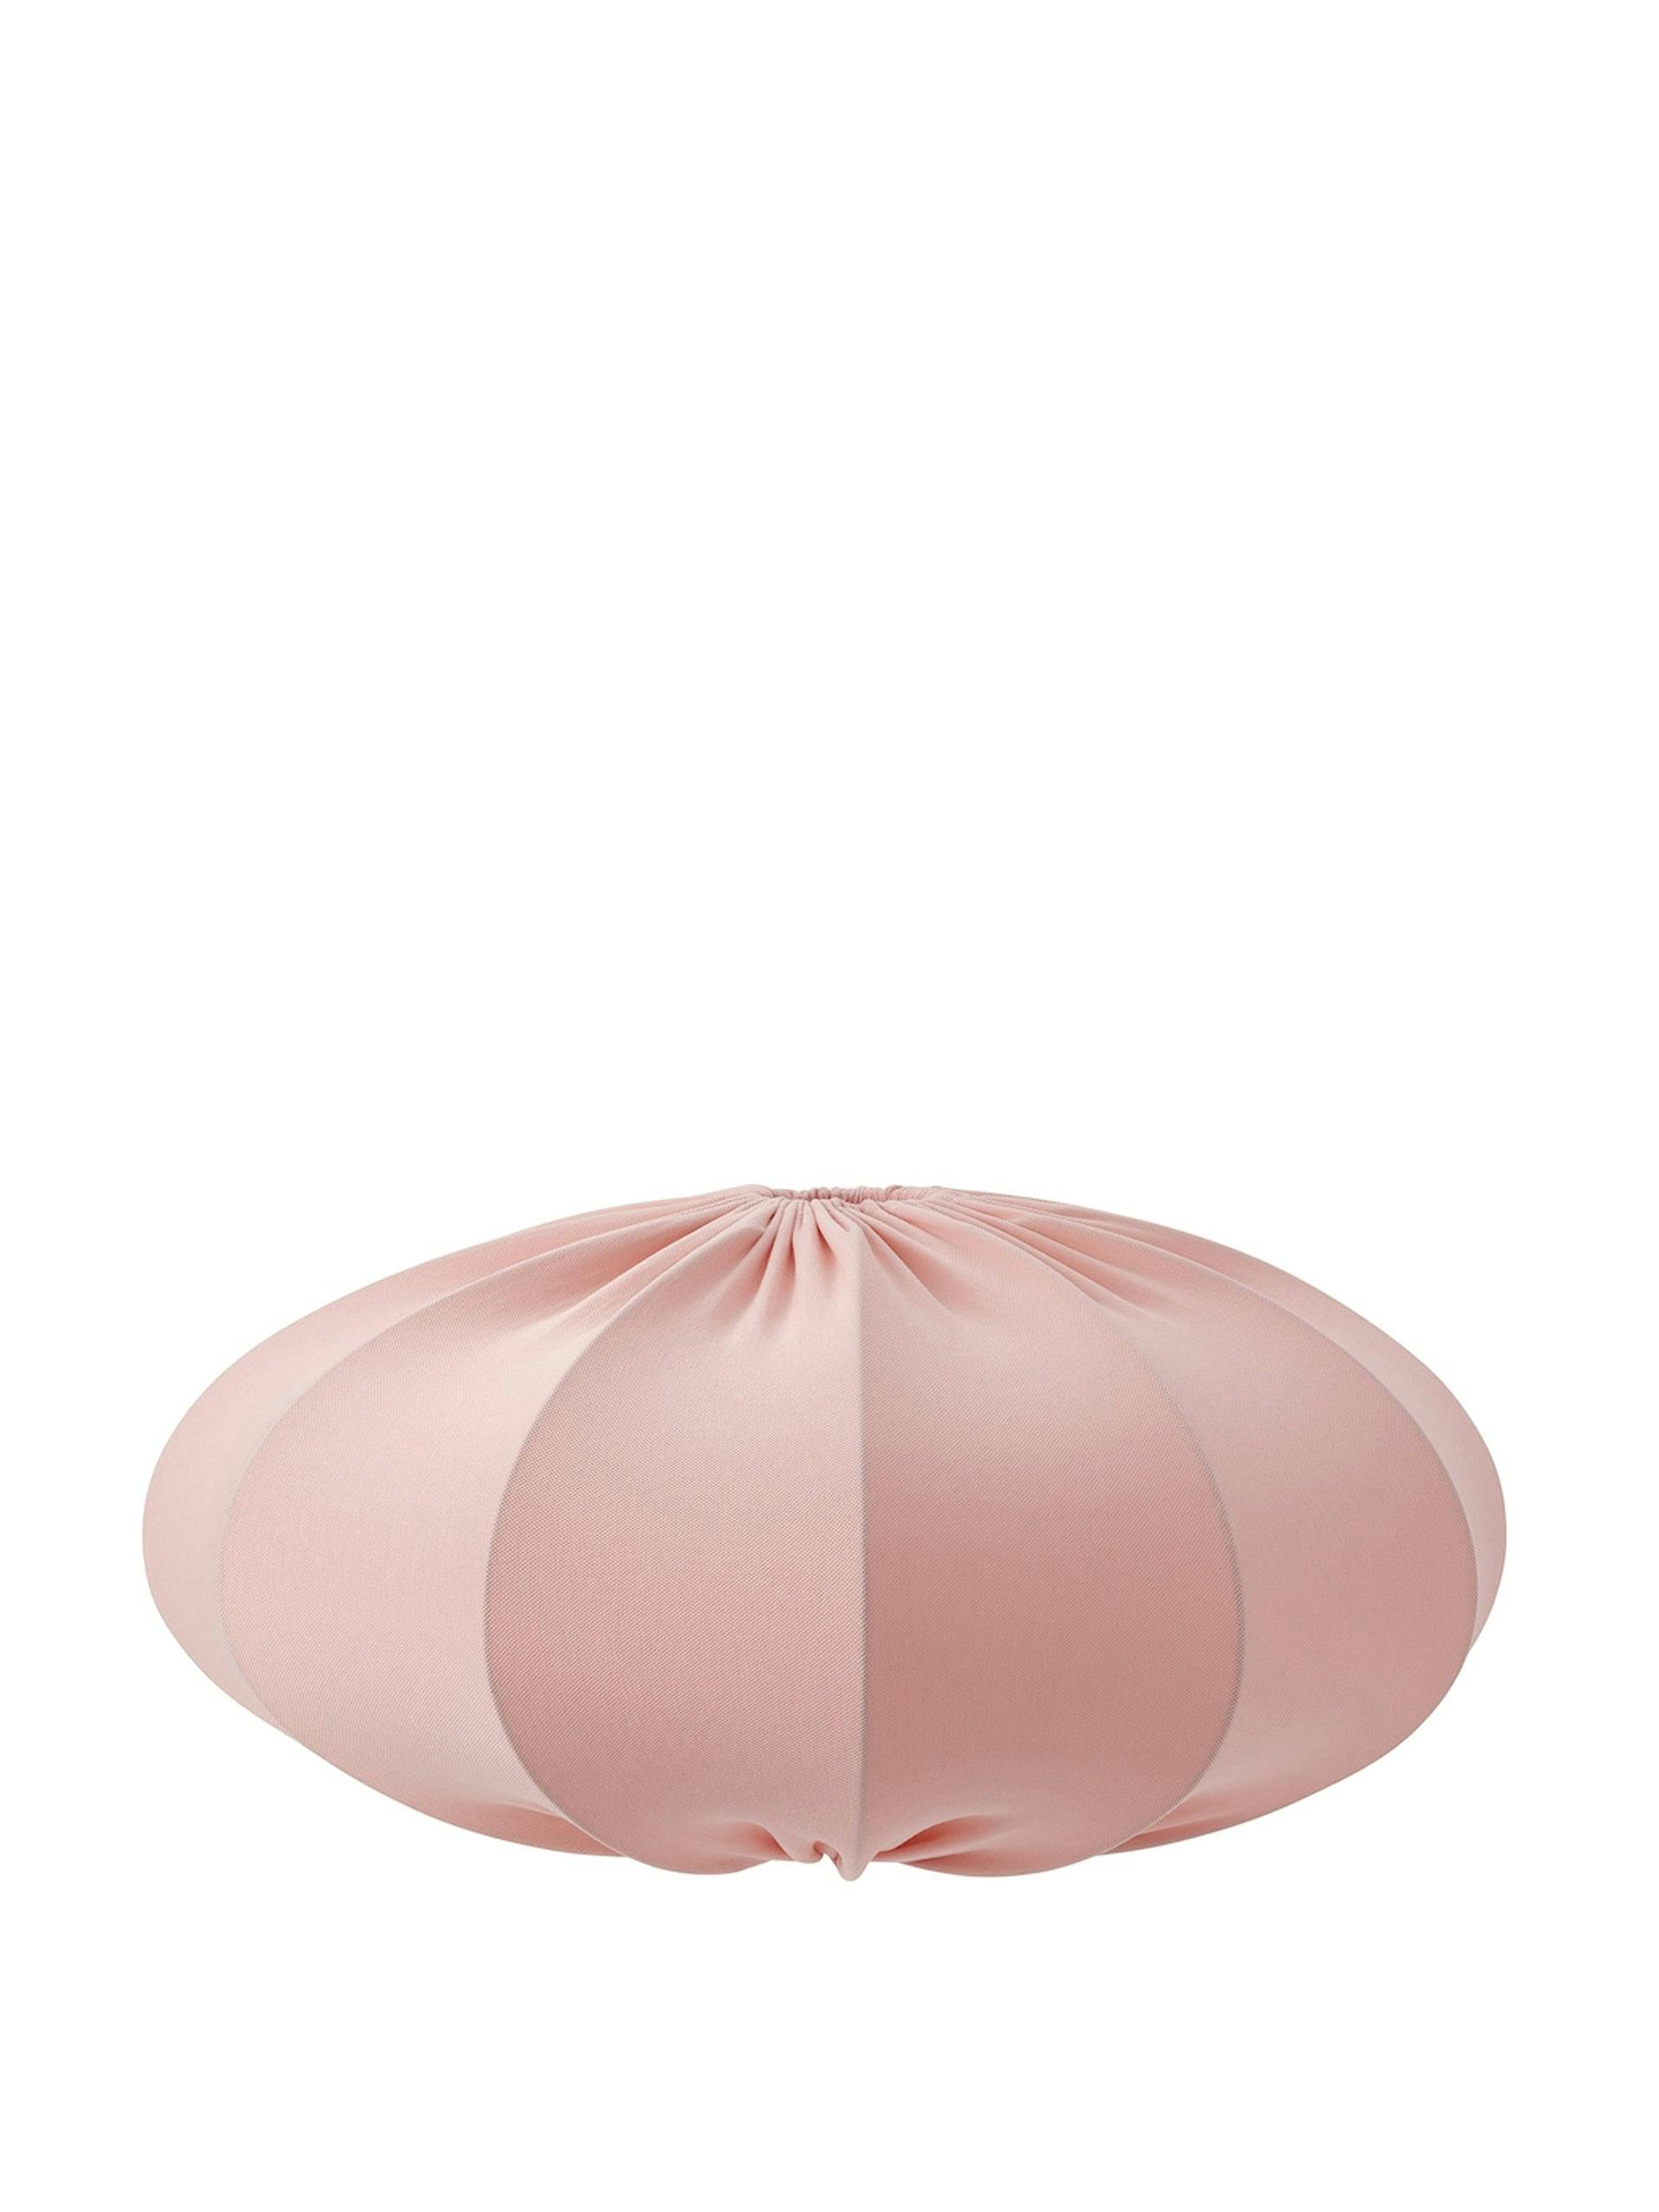 Pink oval lamp shade